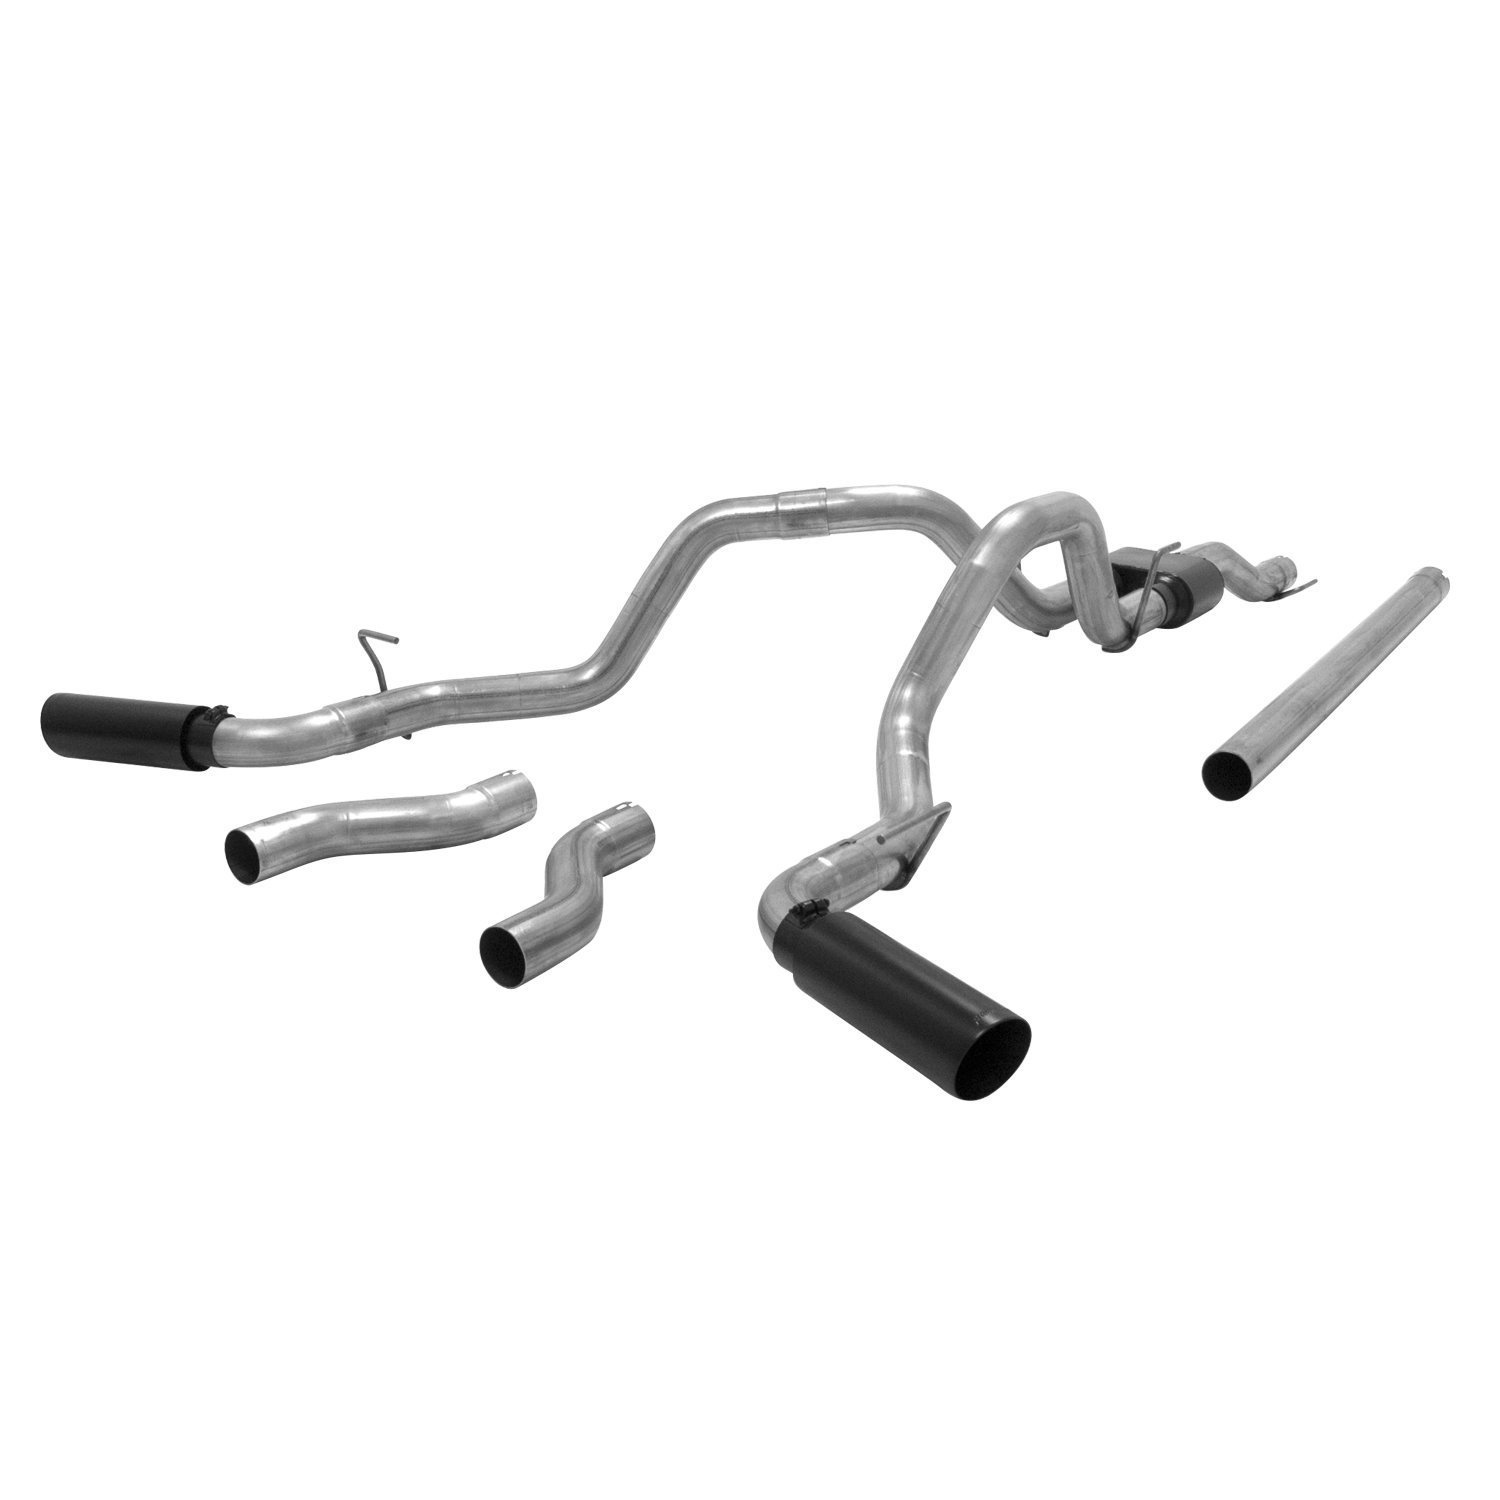 Outlaw Series Cat-Back Exhaust System 2006-2008 Dodge Ram